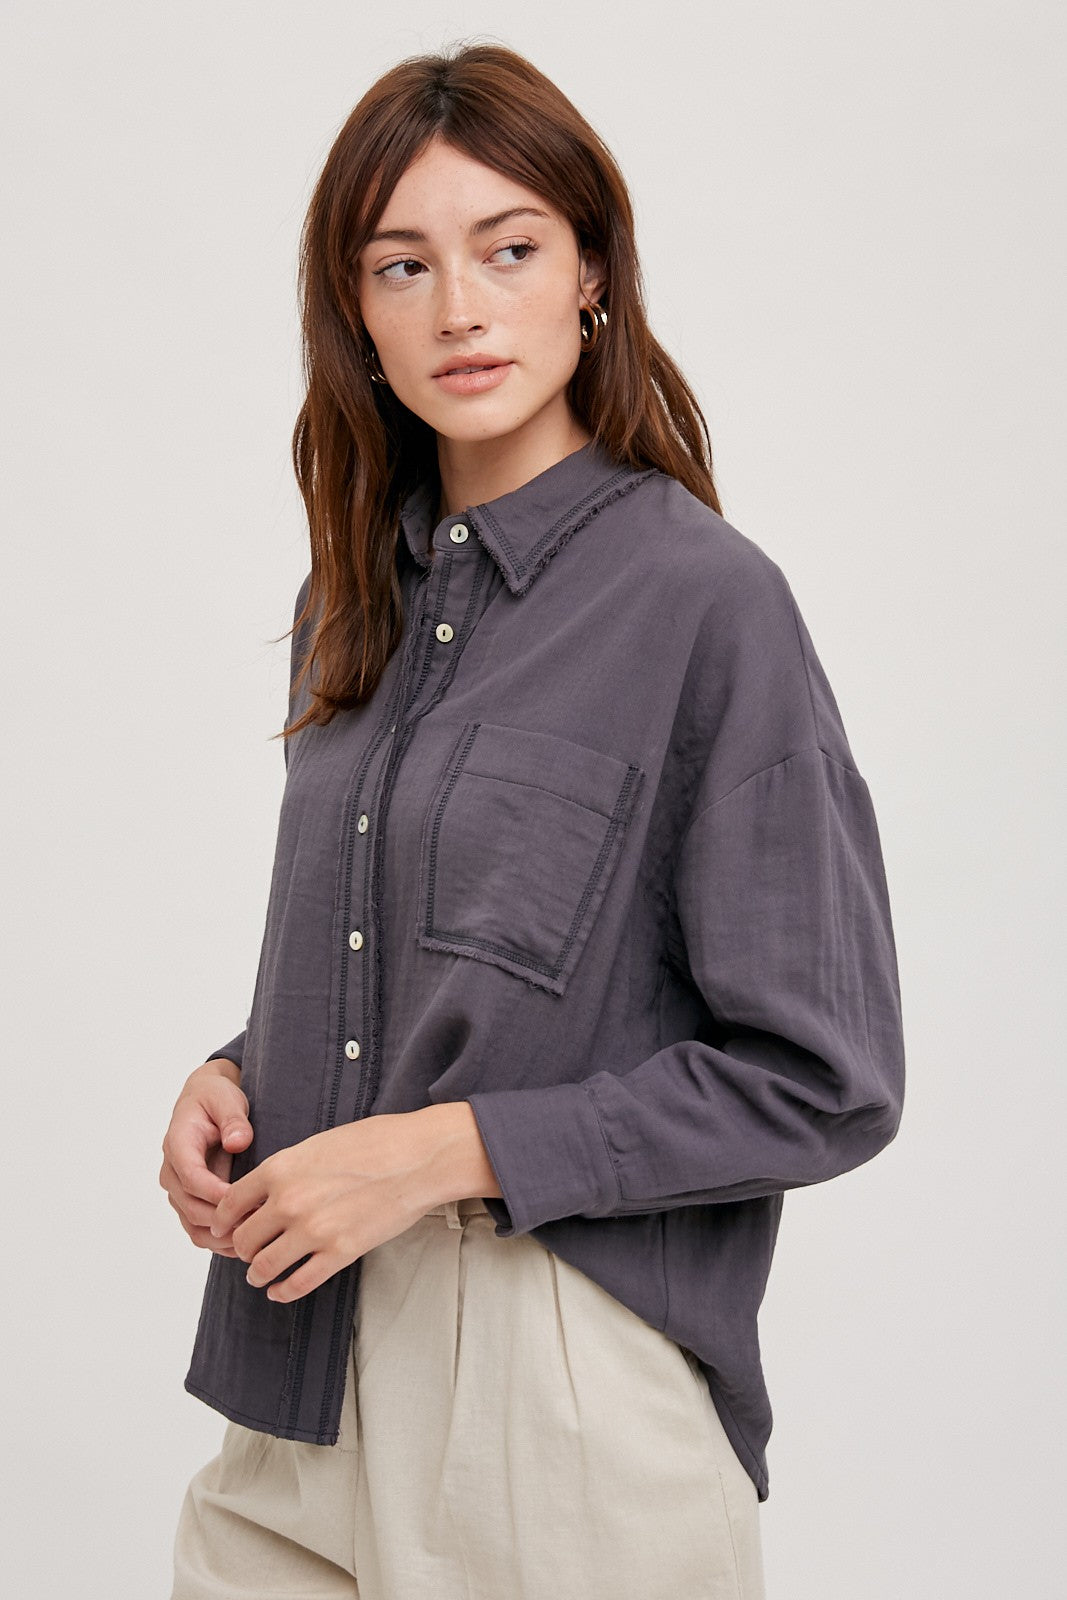 let's get out charcoal button-up